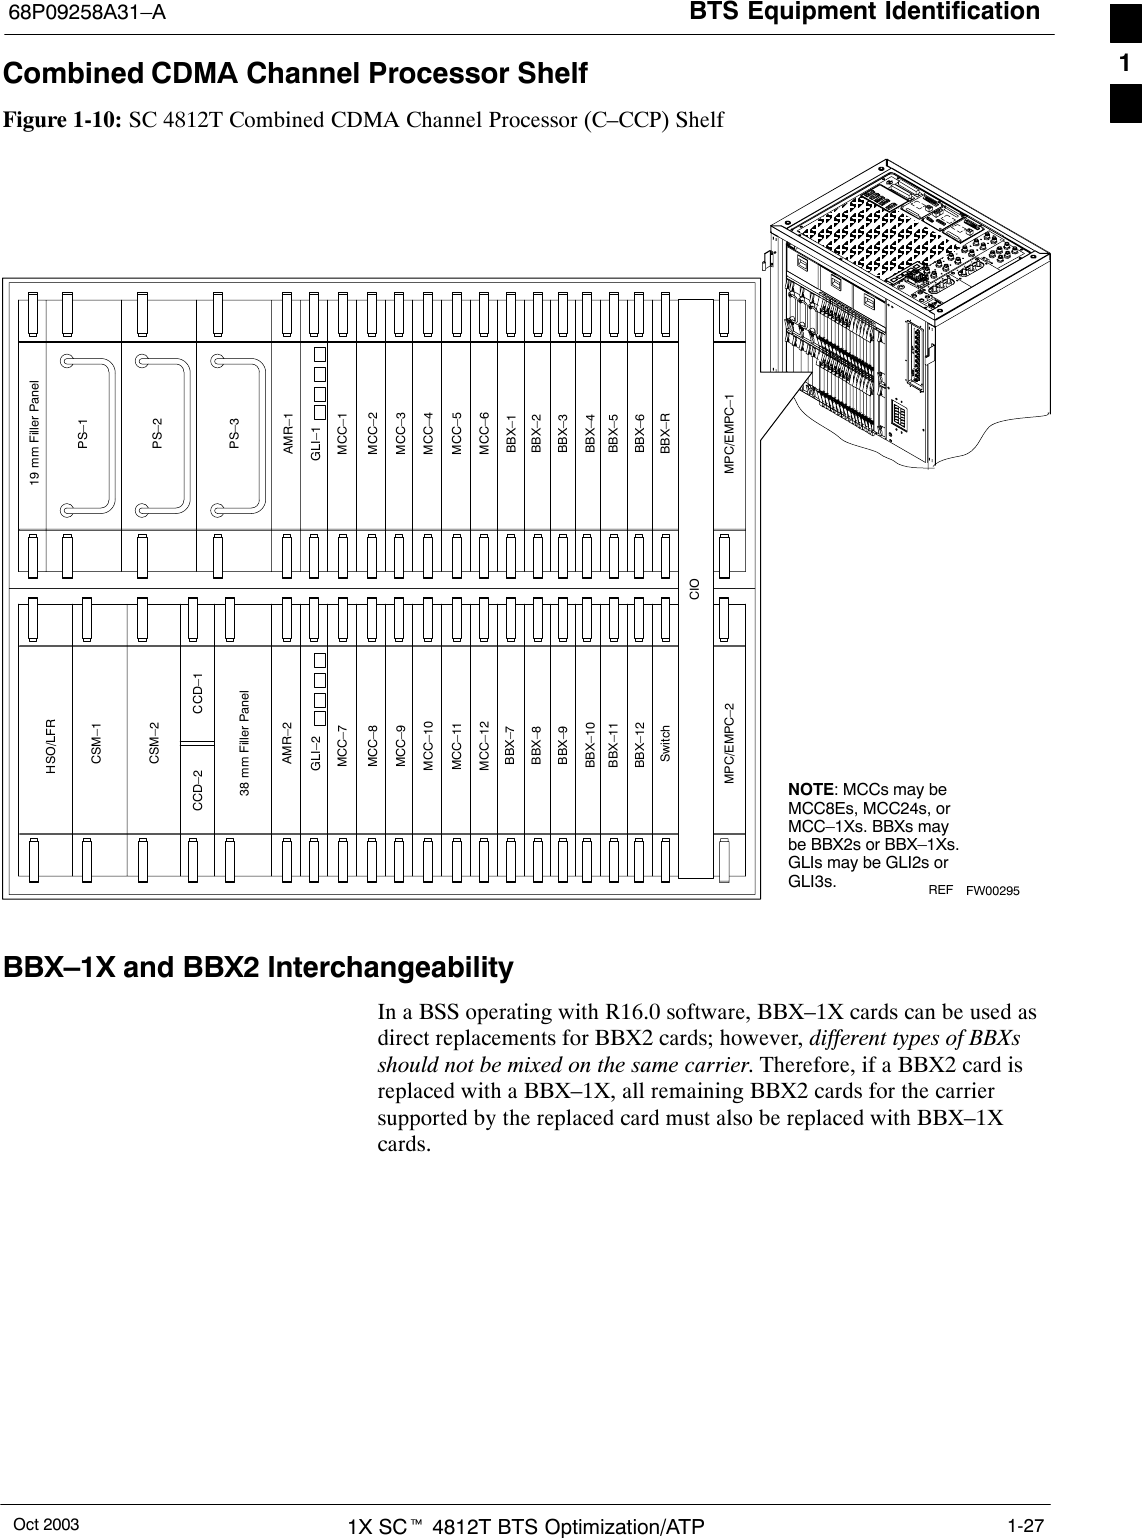 BTS Equipment Identification68P09258A31–AOct 2003 1X SCt 4812T BTS Optimization/ATP 1-27Combined CDMA Channel Processor ShelfFigure 1-10: SC 4812T Combined CDMA Channel Processor (C–CCP) Shelf19 mm Filler PanelPS–3AMR–1CSM–1CSM–238 mm Filler PanelAMR–2GLI–1GLI–2MCC–6BBX–1BBX–2BBX–3BBX–4BBX–5BBX–6BBX–RSwitchMPC/EMPC–1MPC/EMPC–2CIOBBX–7BBX–8BBX–9BBX–10BBX–11BBX–12MCC–5MCC–4MCC–3MCC–2MCC–1MCC–12MCC–11MCC–10MCC–9MCC–8MCC–7PS–2PS–1CCD–2 CCD–1NOTE: MCCs may be MCC8Es, MCC24s, orMCC–1Xs. BBXs maybe BBX2s or BBX–1Xs.GLIs may be GLI2s orGLI3s.HSO/LFRFW00295REFBBX–1X and BBX2 InterchangeabilityIn a BSS operating with R16.0 software, BBX–1X cards can be used asdirect replacements for BBX2 cards; however, different types of BBXsshould not be mixed on the same carrier. Therefore, if a BBX2 card isreplaced with a BBX–1X, all remaining BBX2 cards for the carriersupported by the replaced card must also be replaced with BBX–1Xcards.1